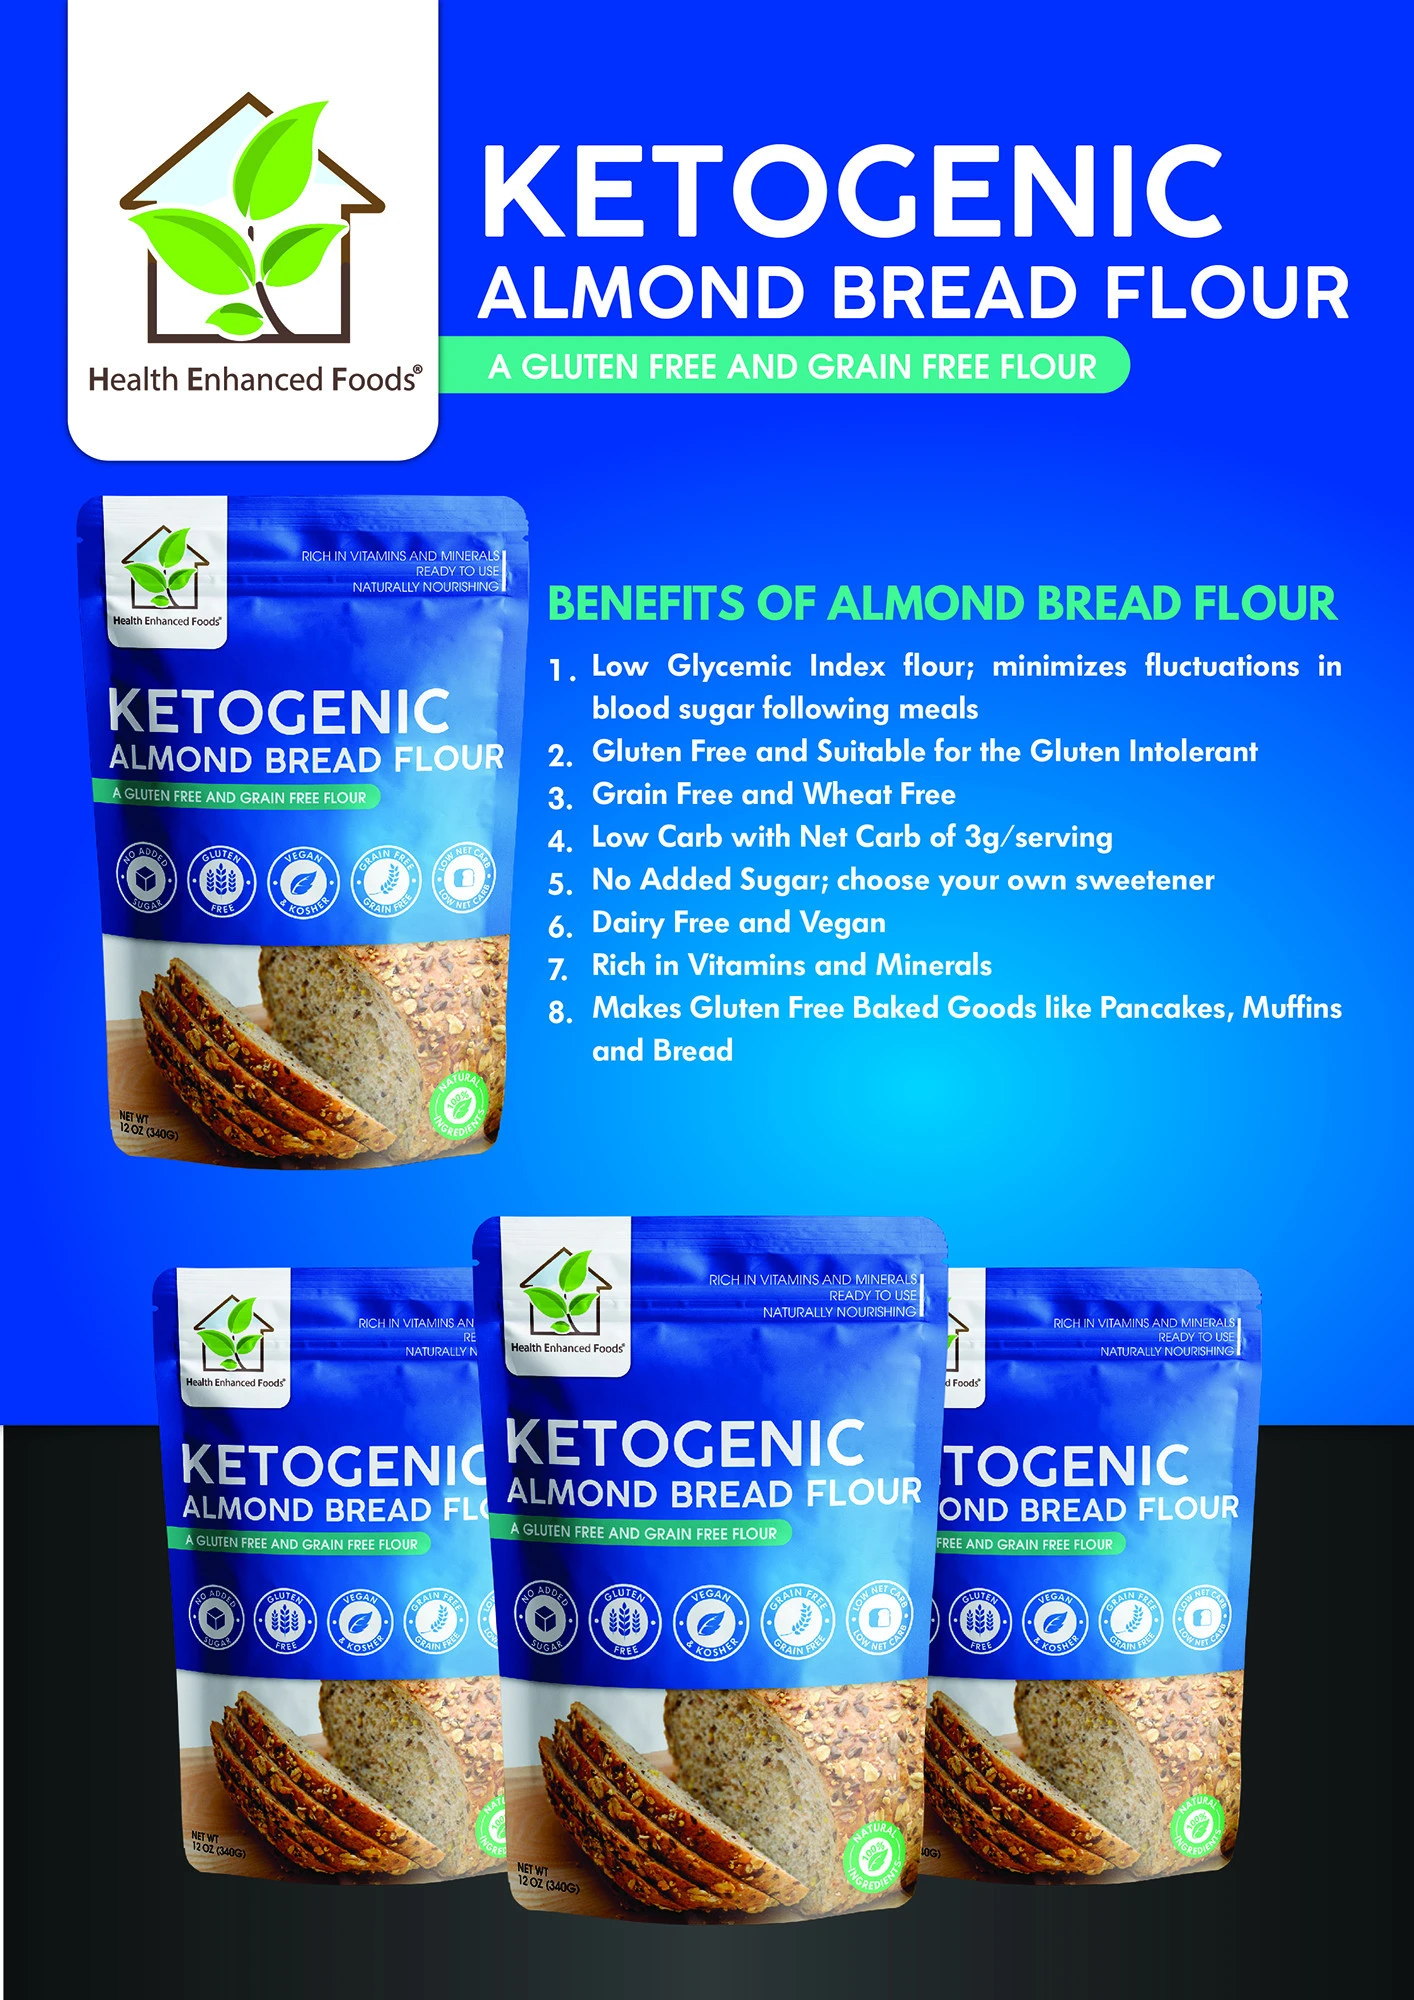 Nourishing ketogenic almond low carbohydrate pizza bread flour brands